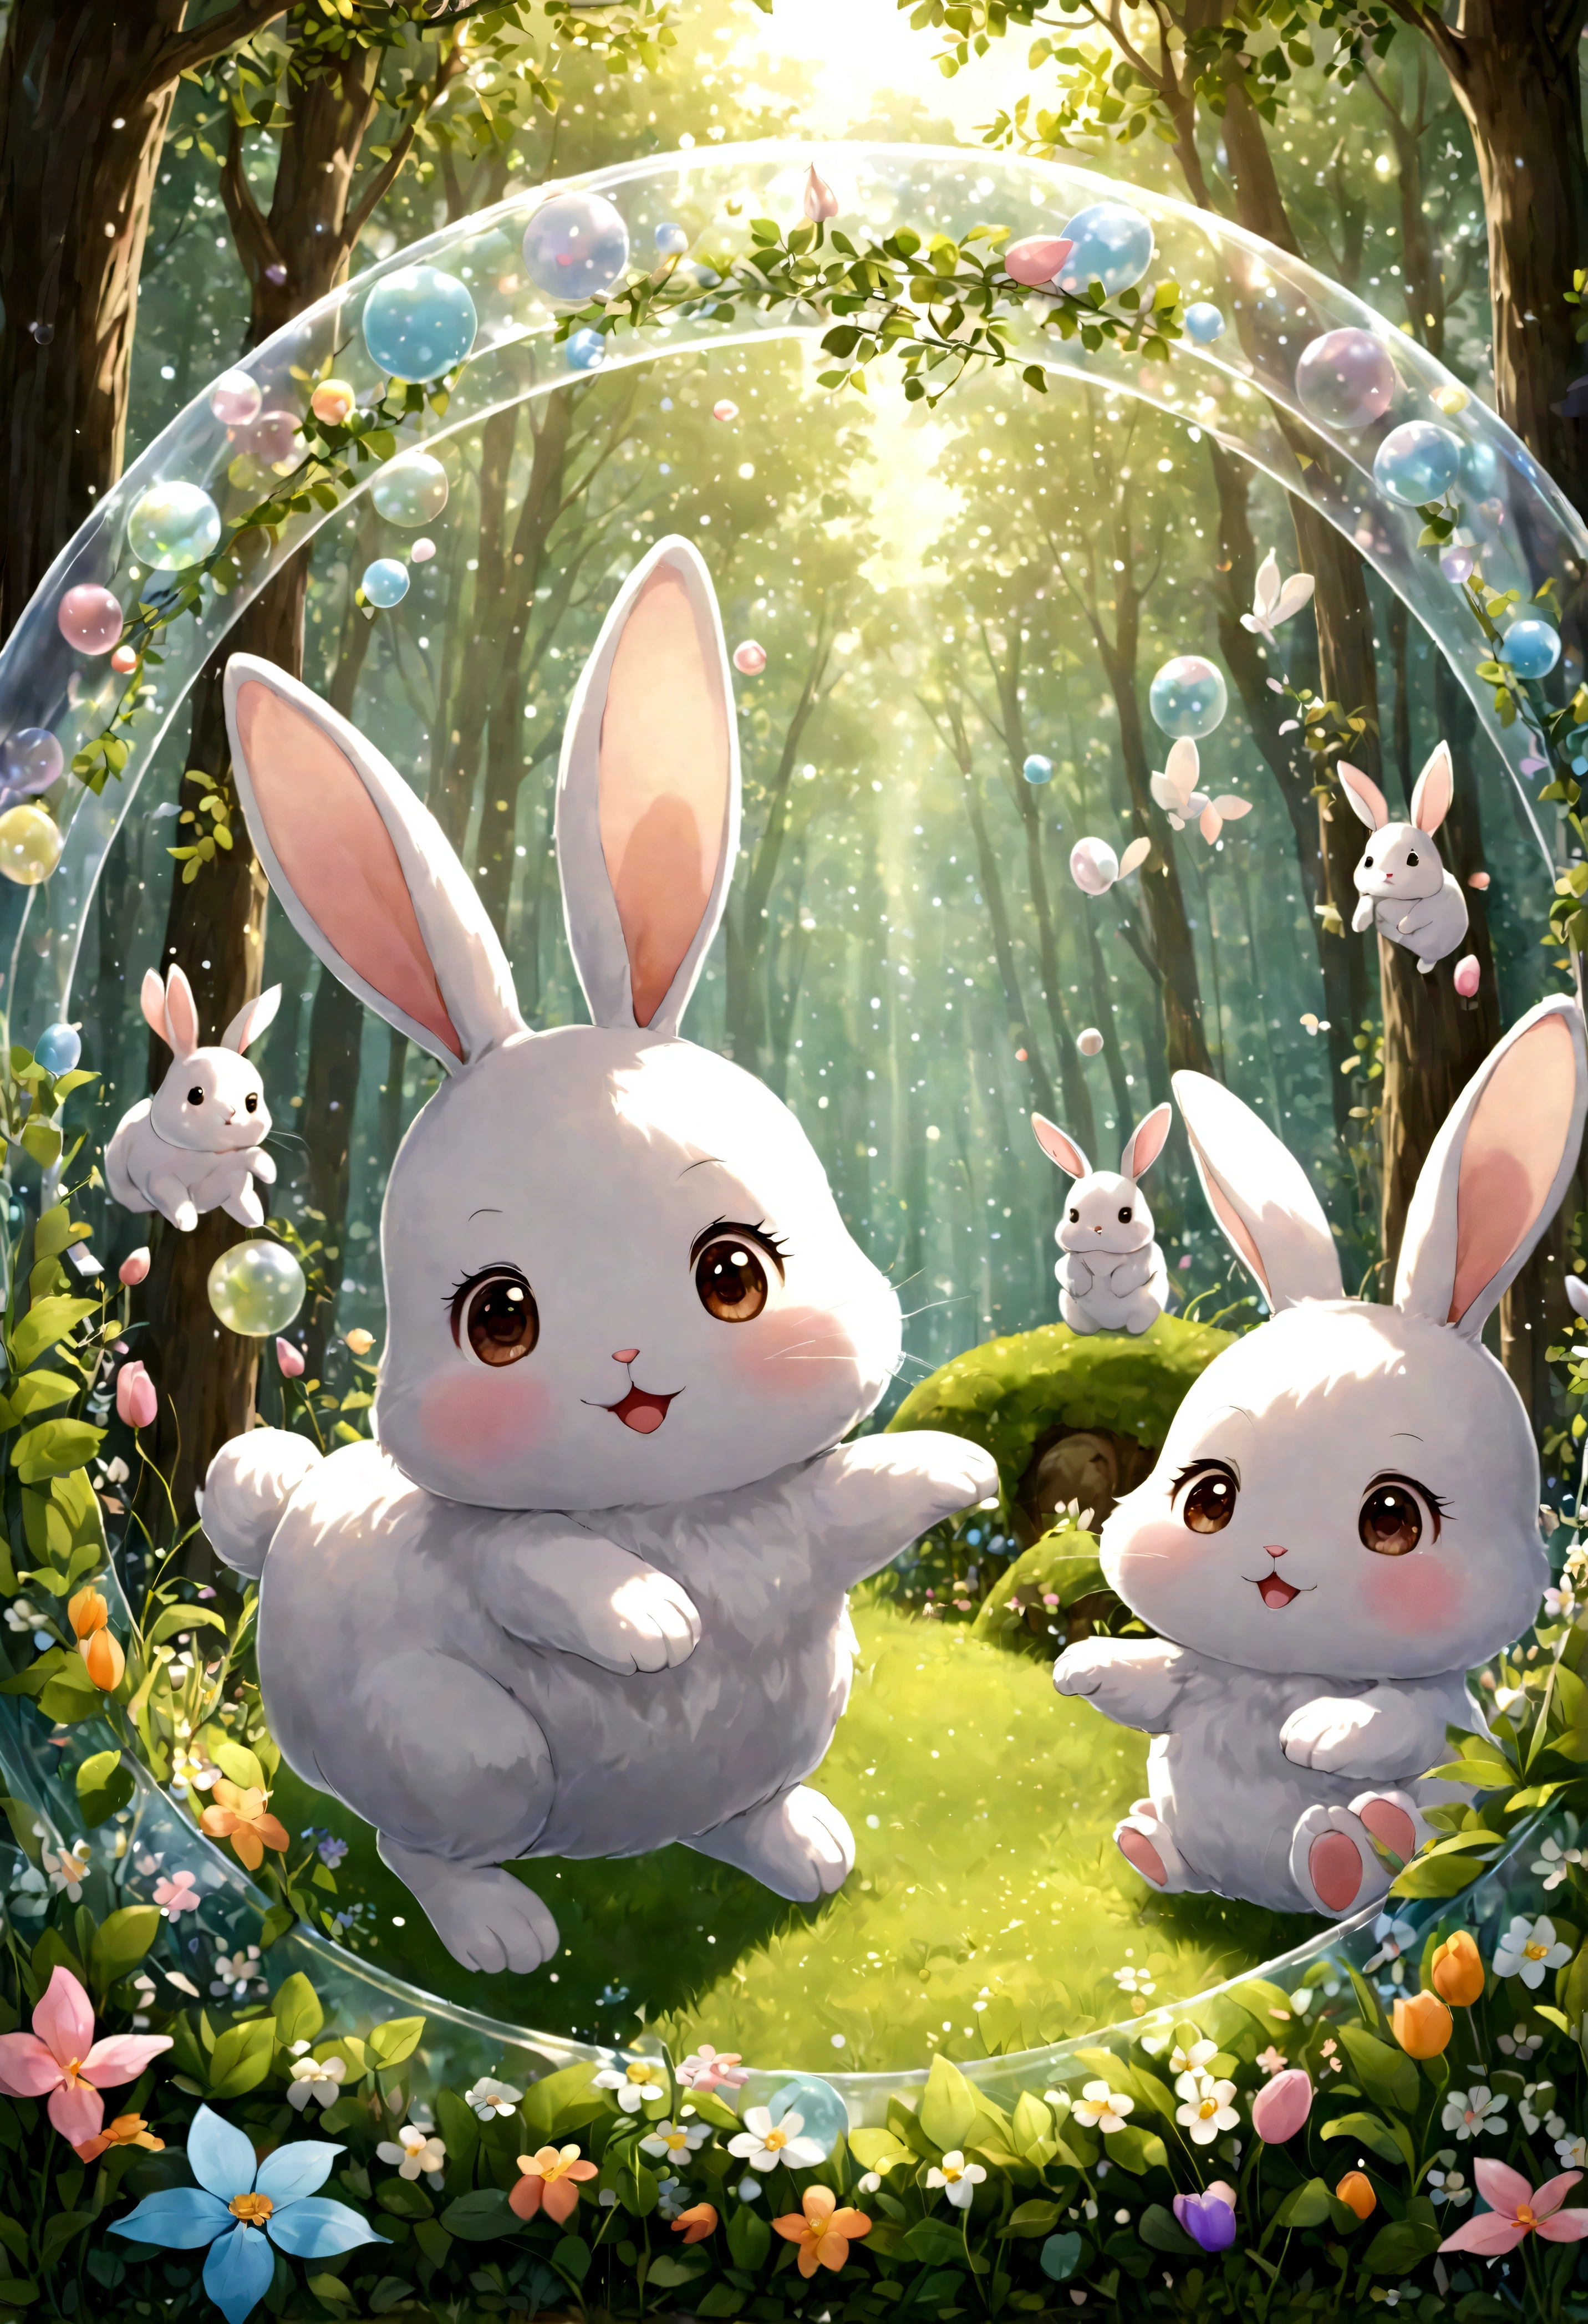 best quality, super fine, 16k, extremely detailed, 2.5D, delicate and dynamic, adorable fantasy story, round fluffy baby bunnies, white, grey, brown, hopping through the forest, transparent and translucent iridescent barrier, sparkling frame made of pastel polka dots